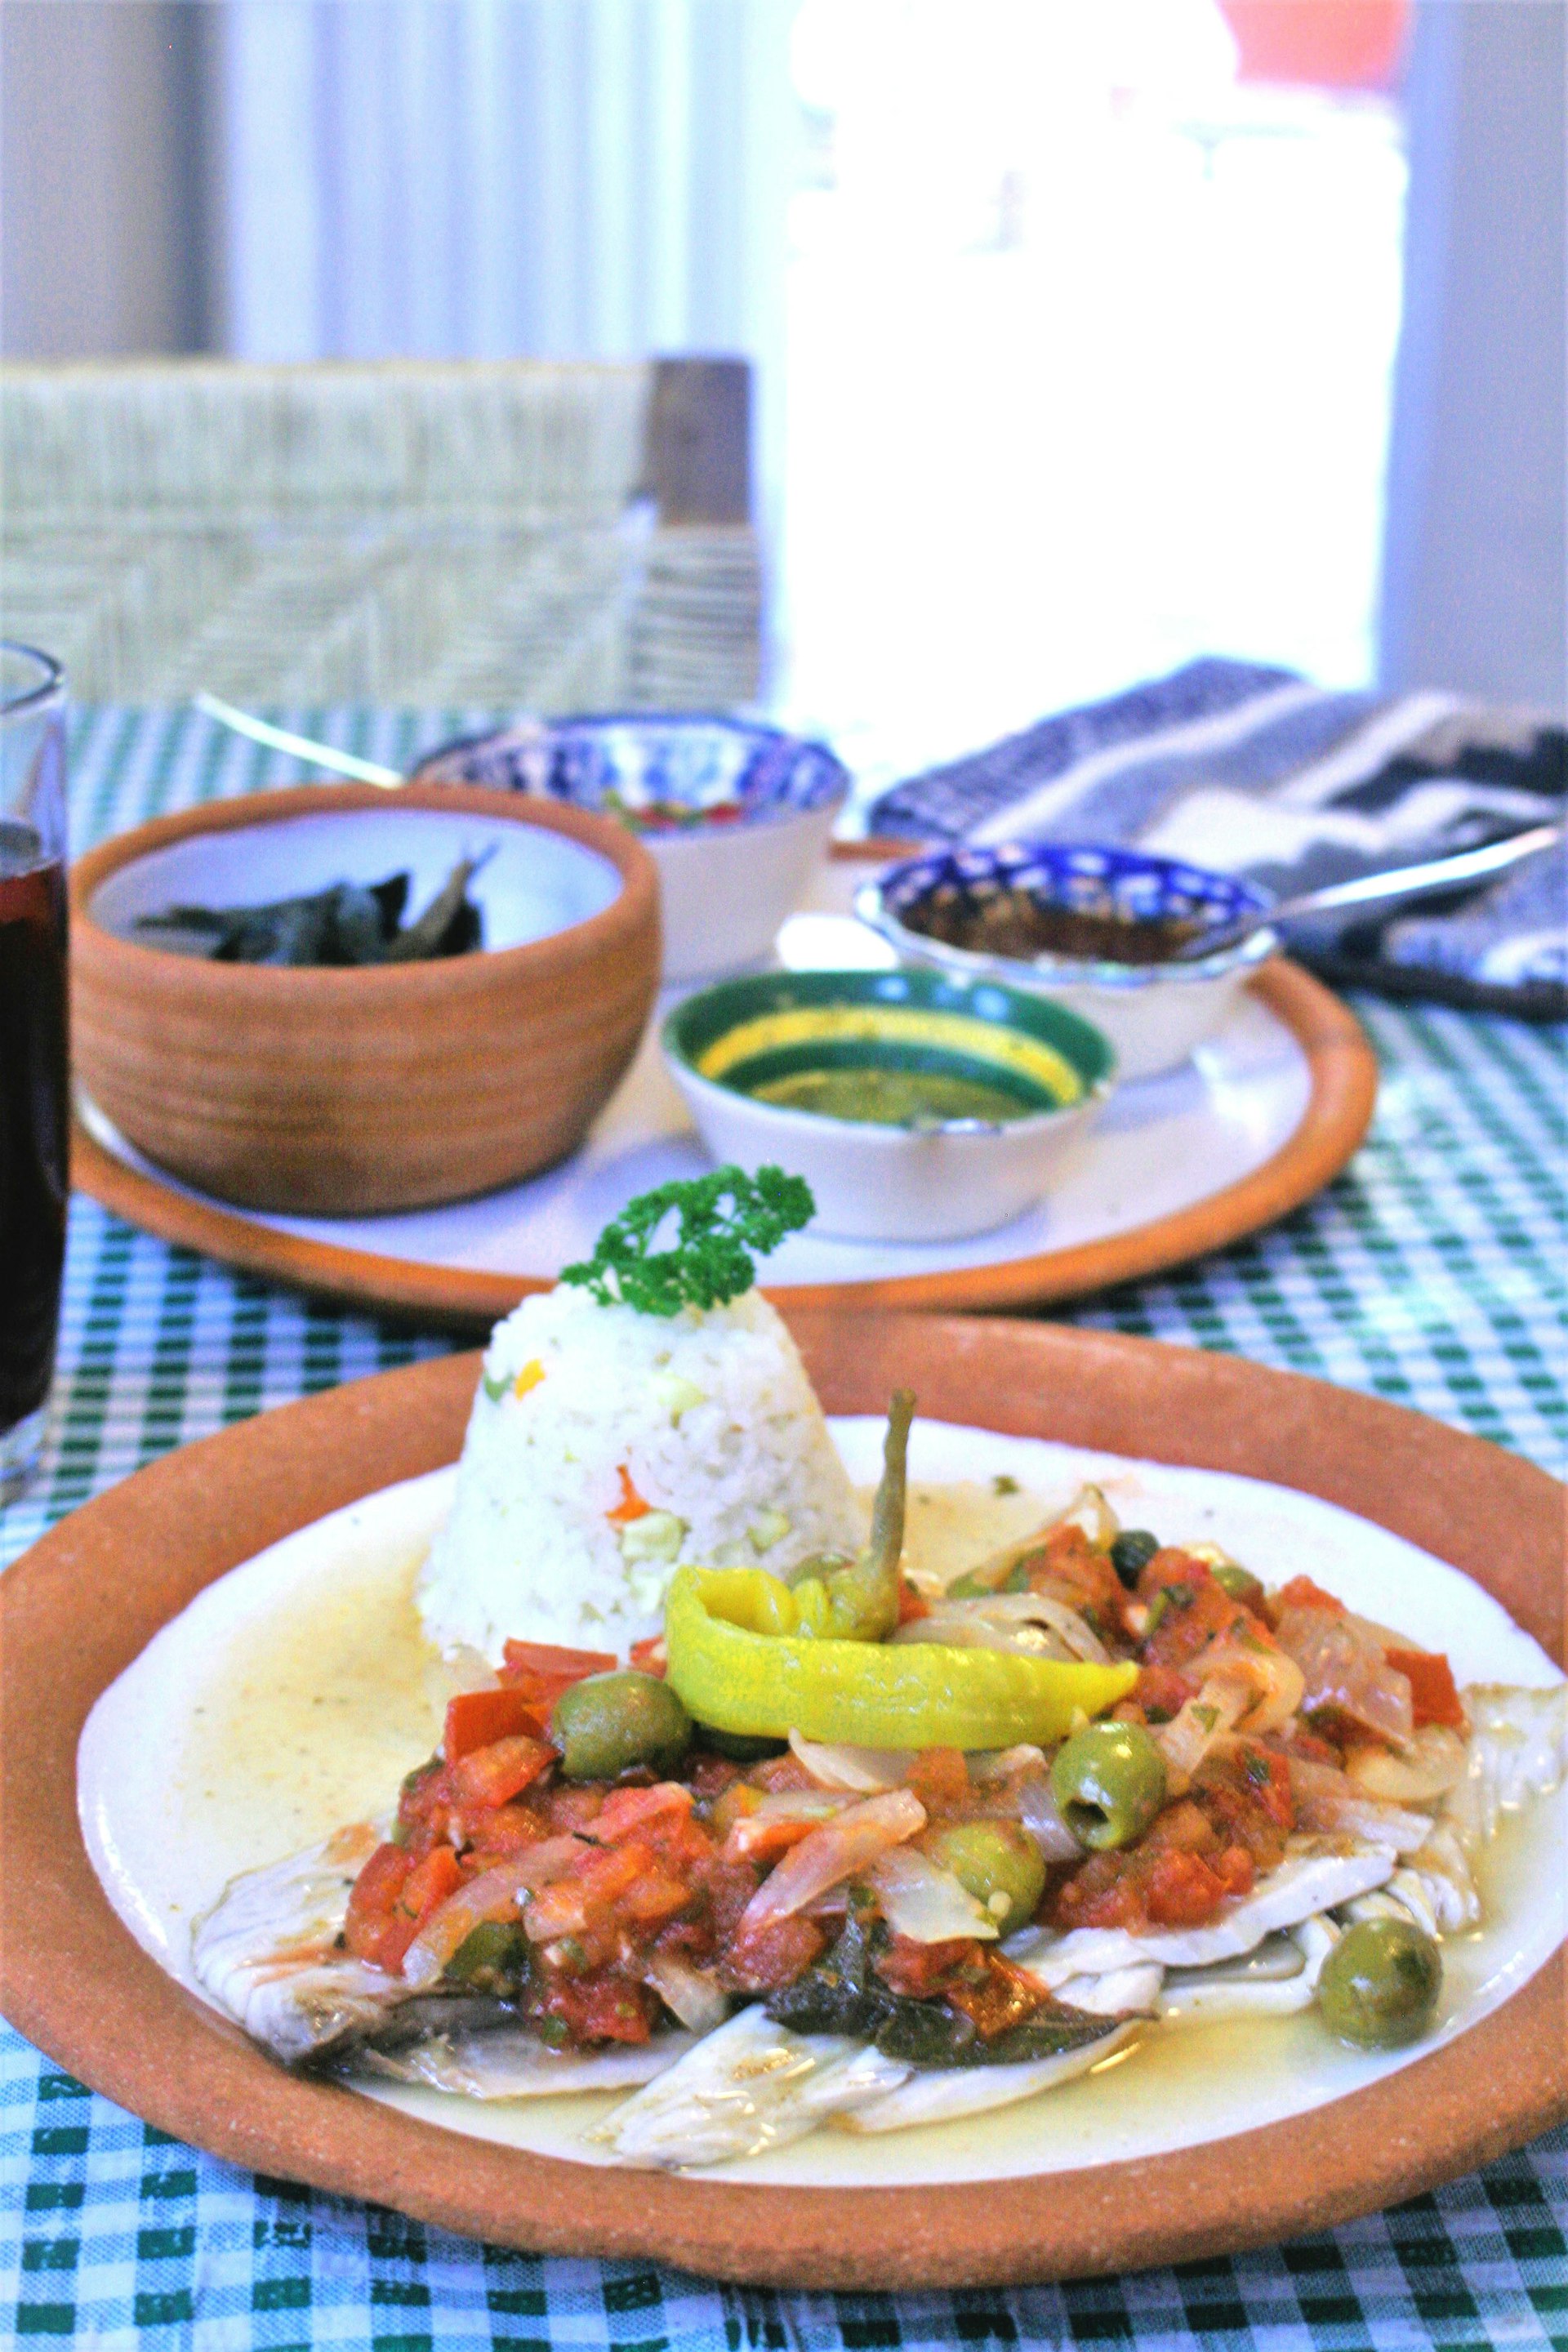 Puttanesca-style fish fillet at Cabuche's Oaxacan-fusion restaurant